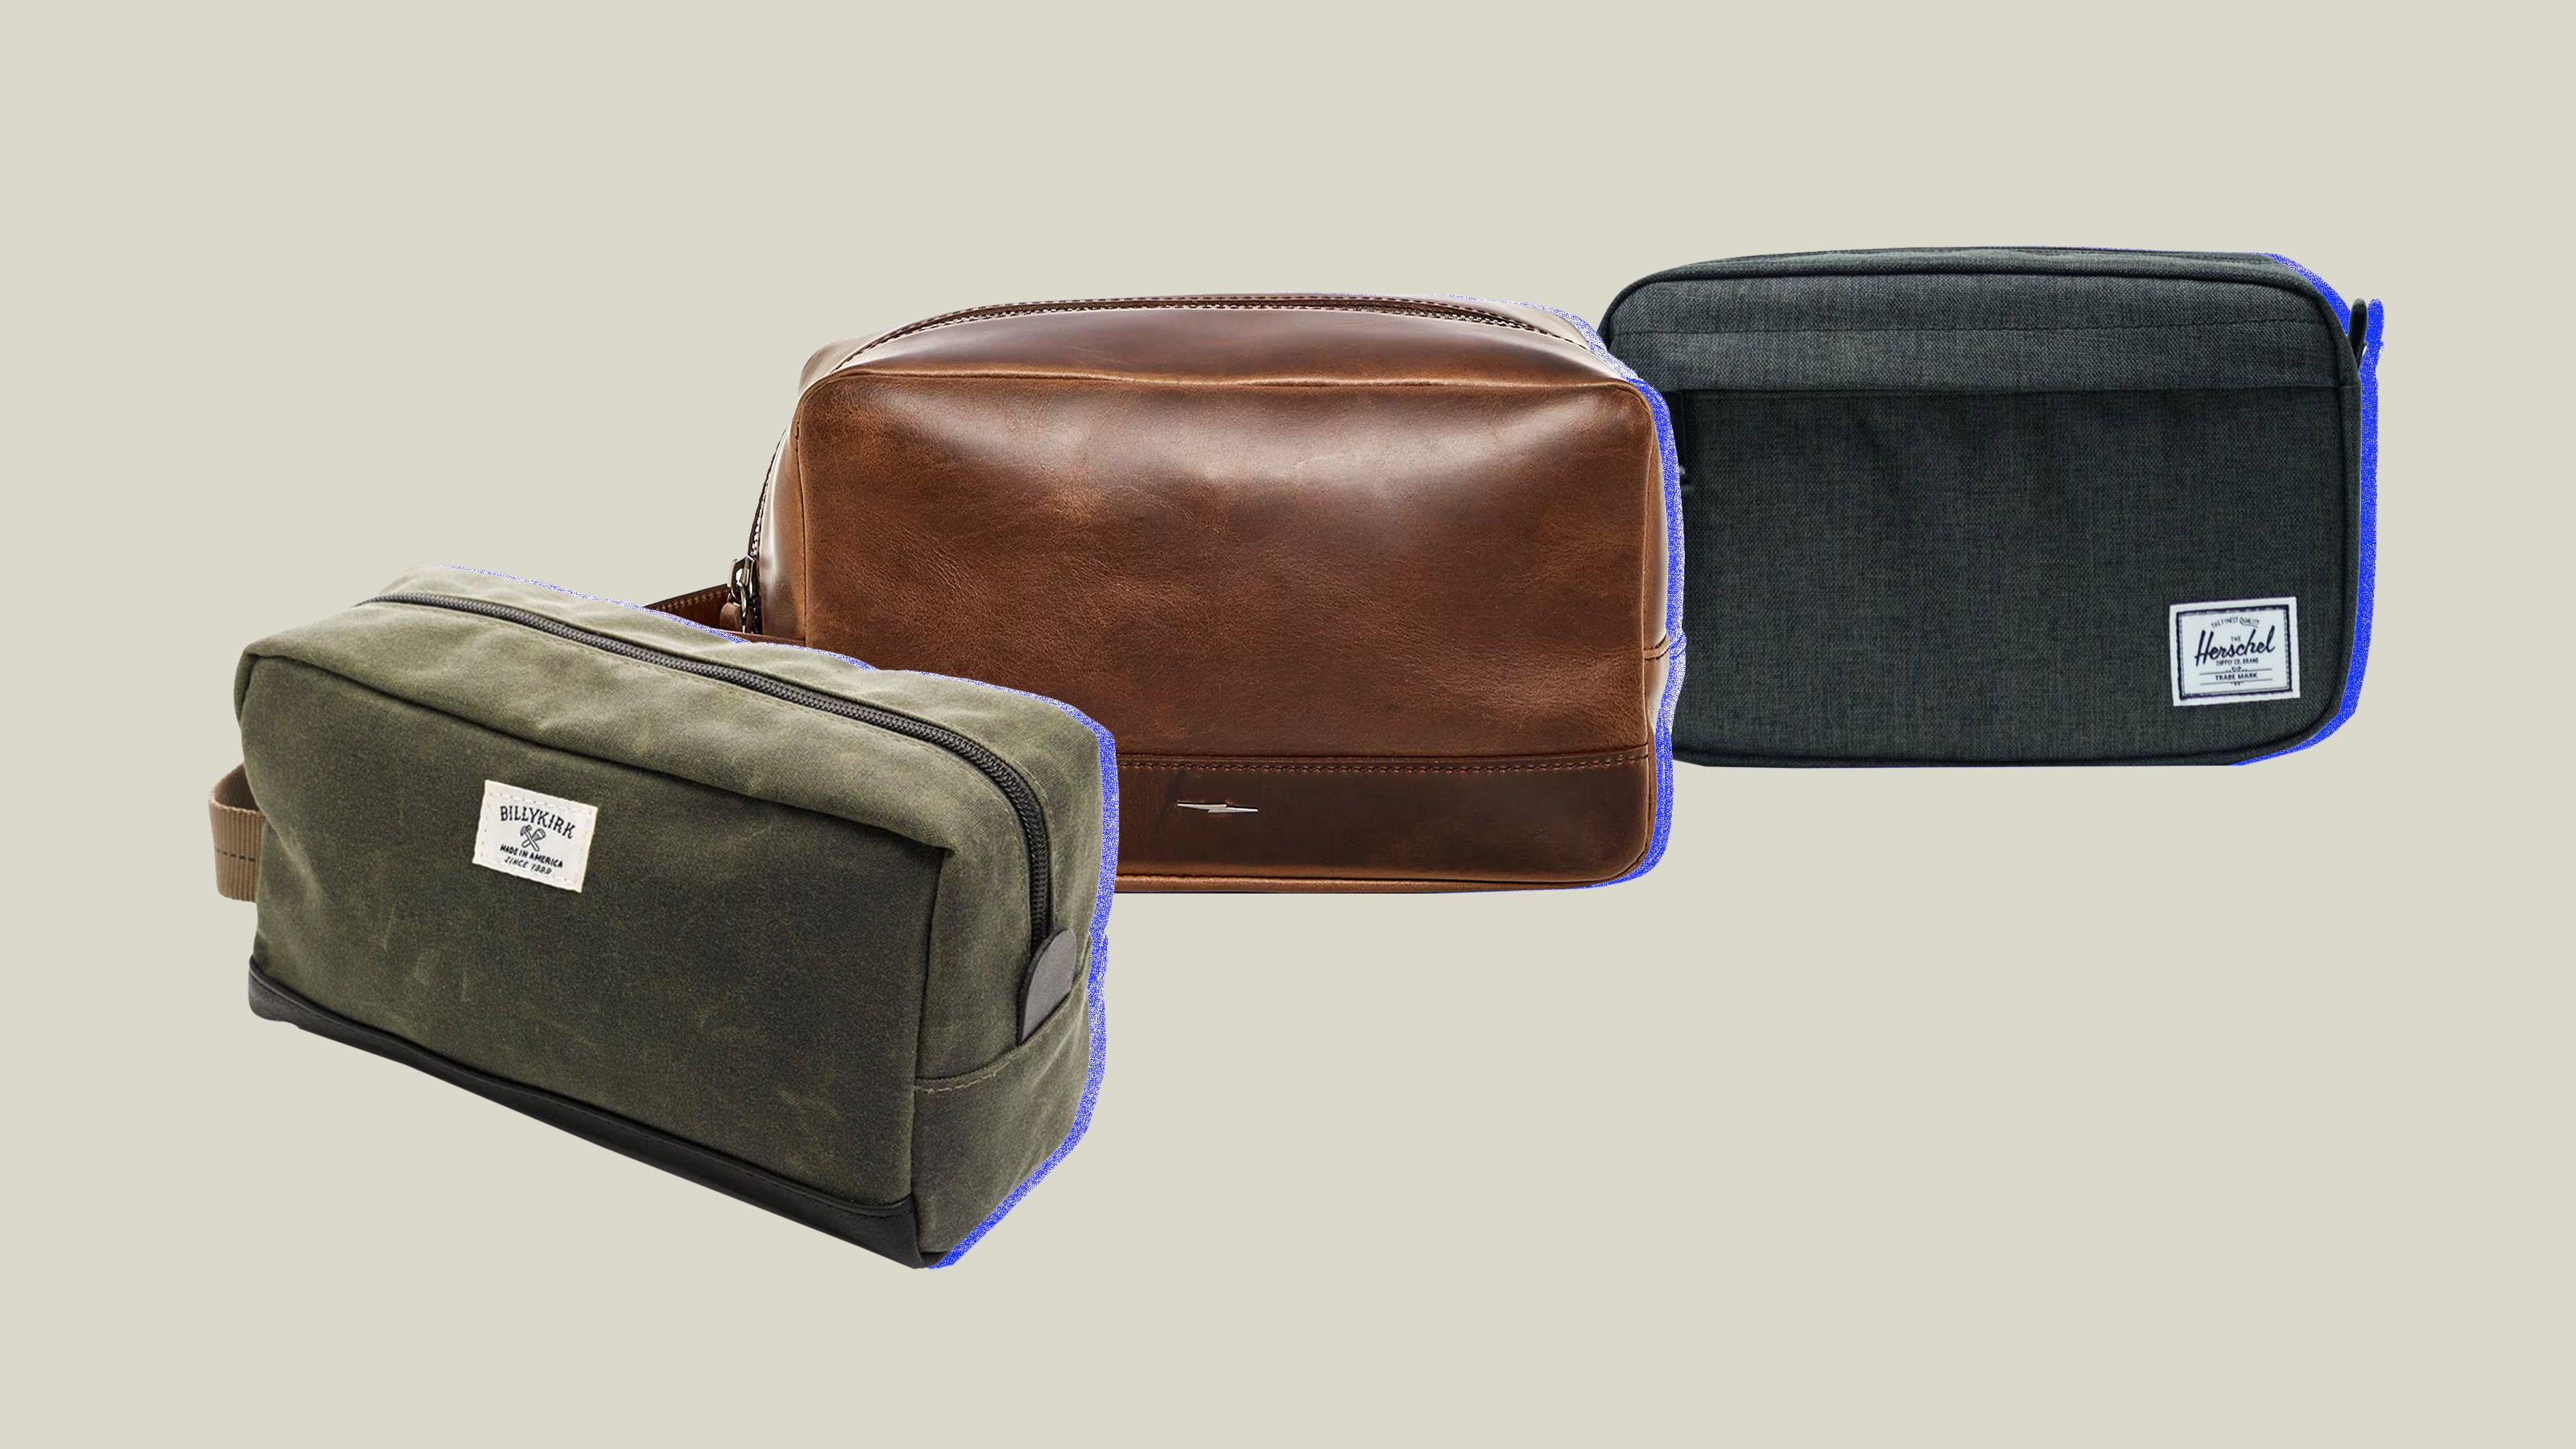 10 Best Dopp Kits and Toiletry Bags for Men 2023